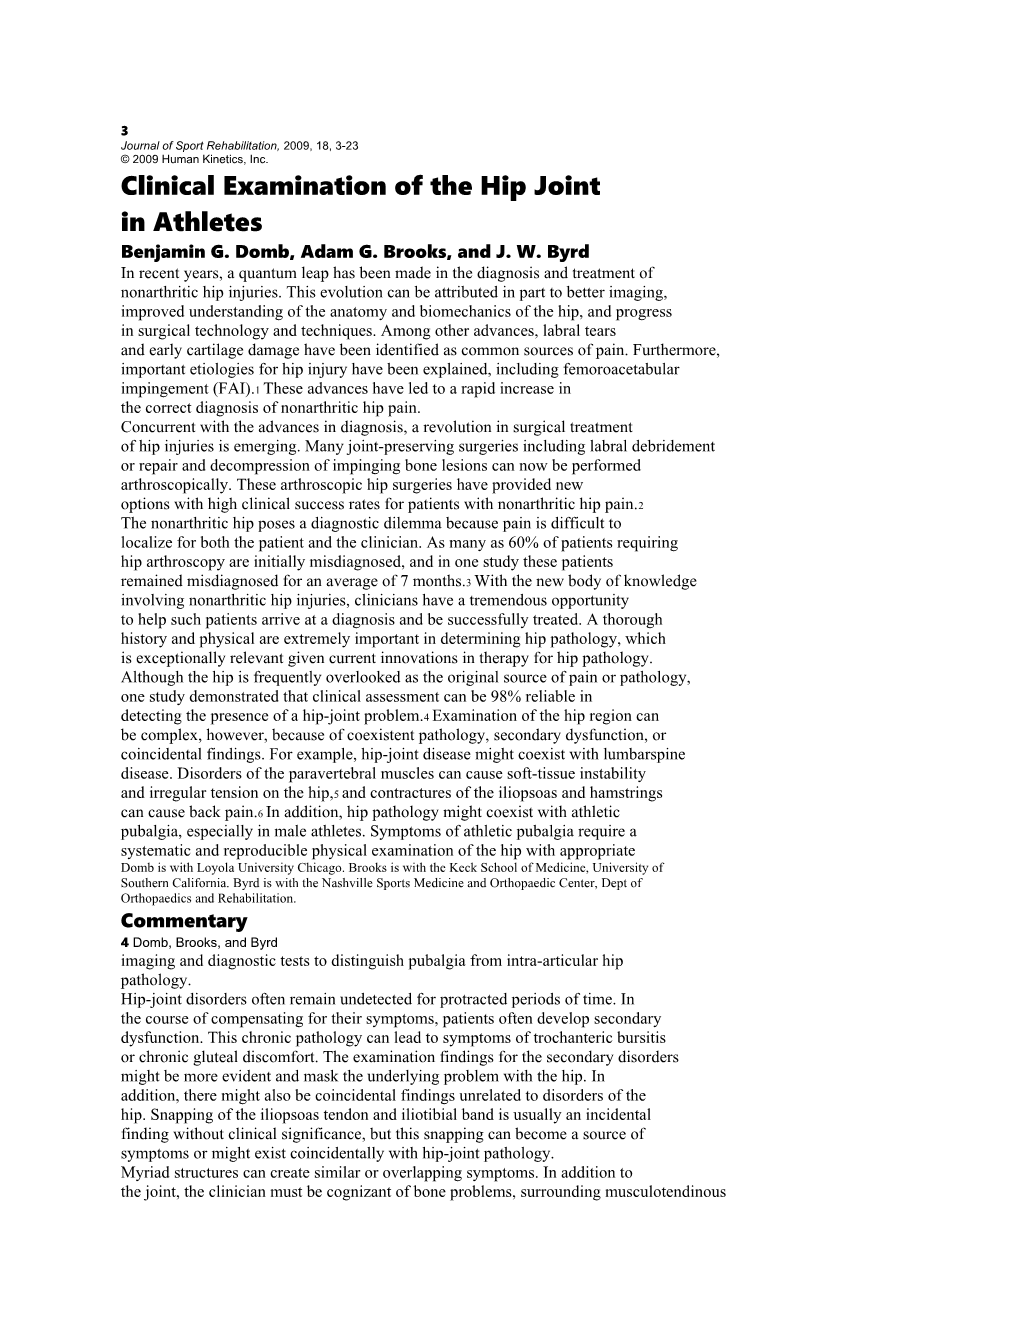 Clinical Examination of the Hip Joint